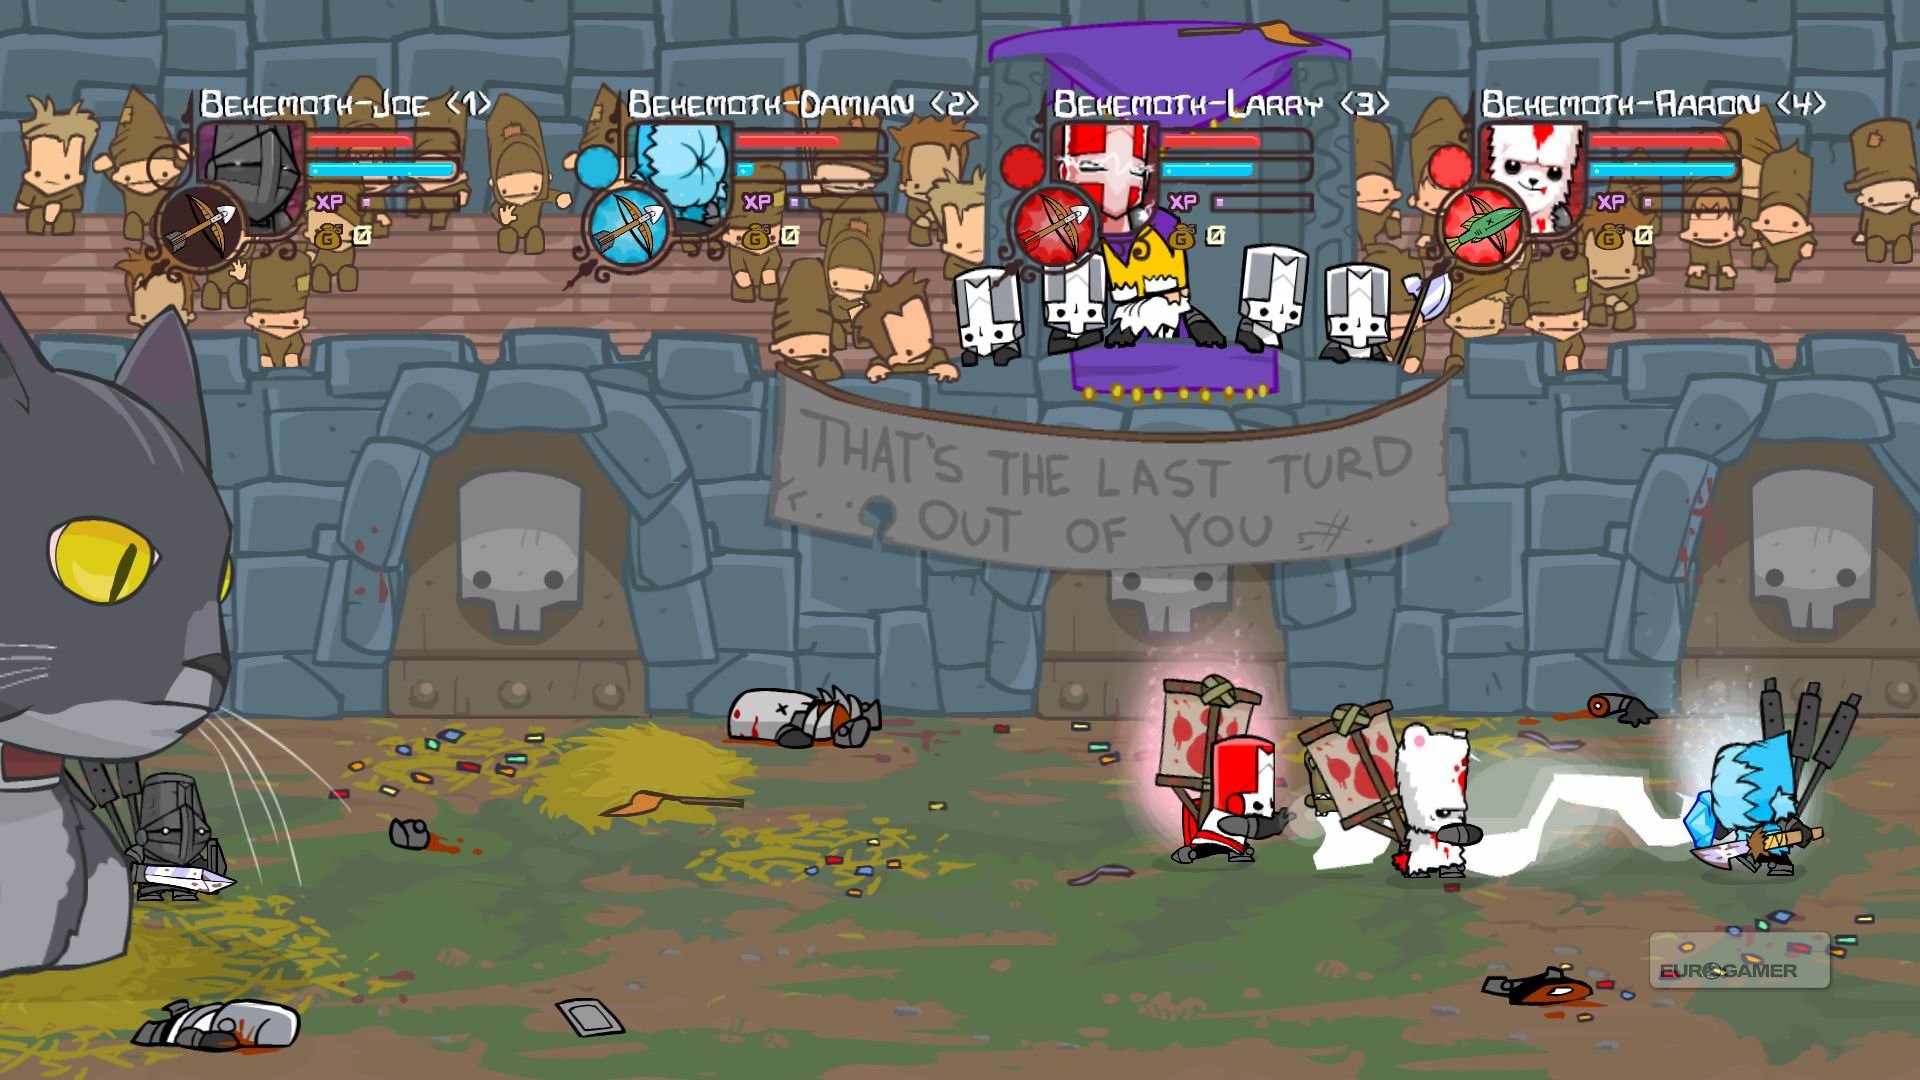 This Battleblock Theater Wallpaper Is Available In Sizes